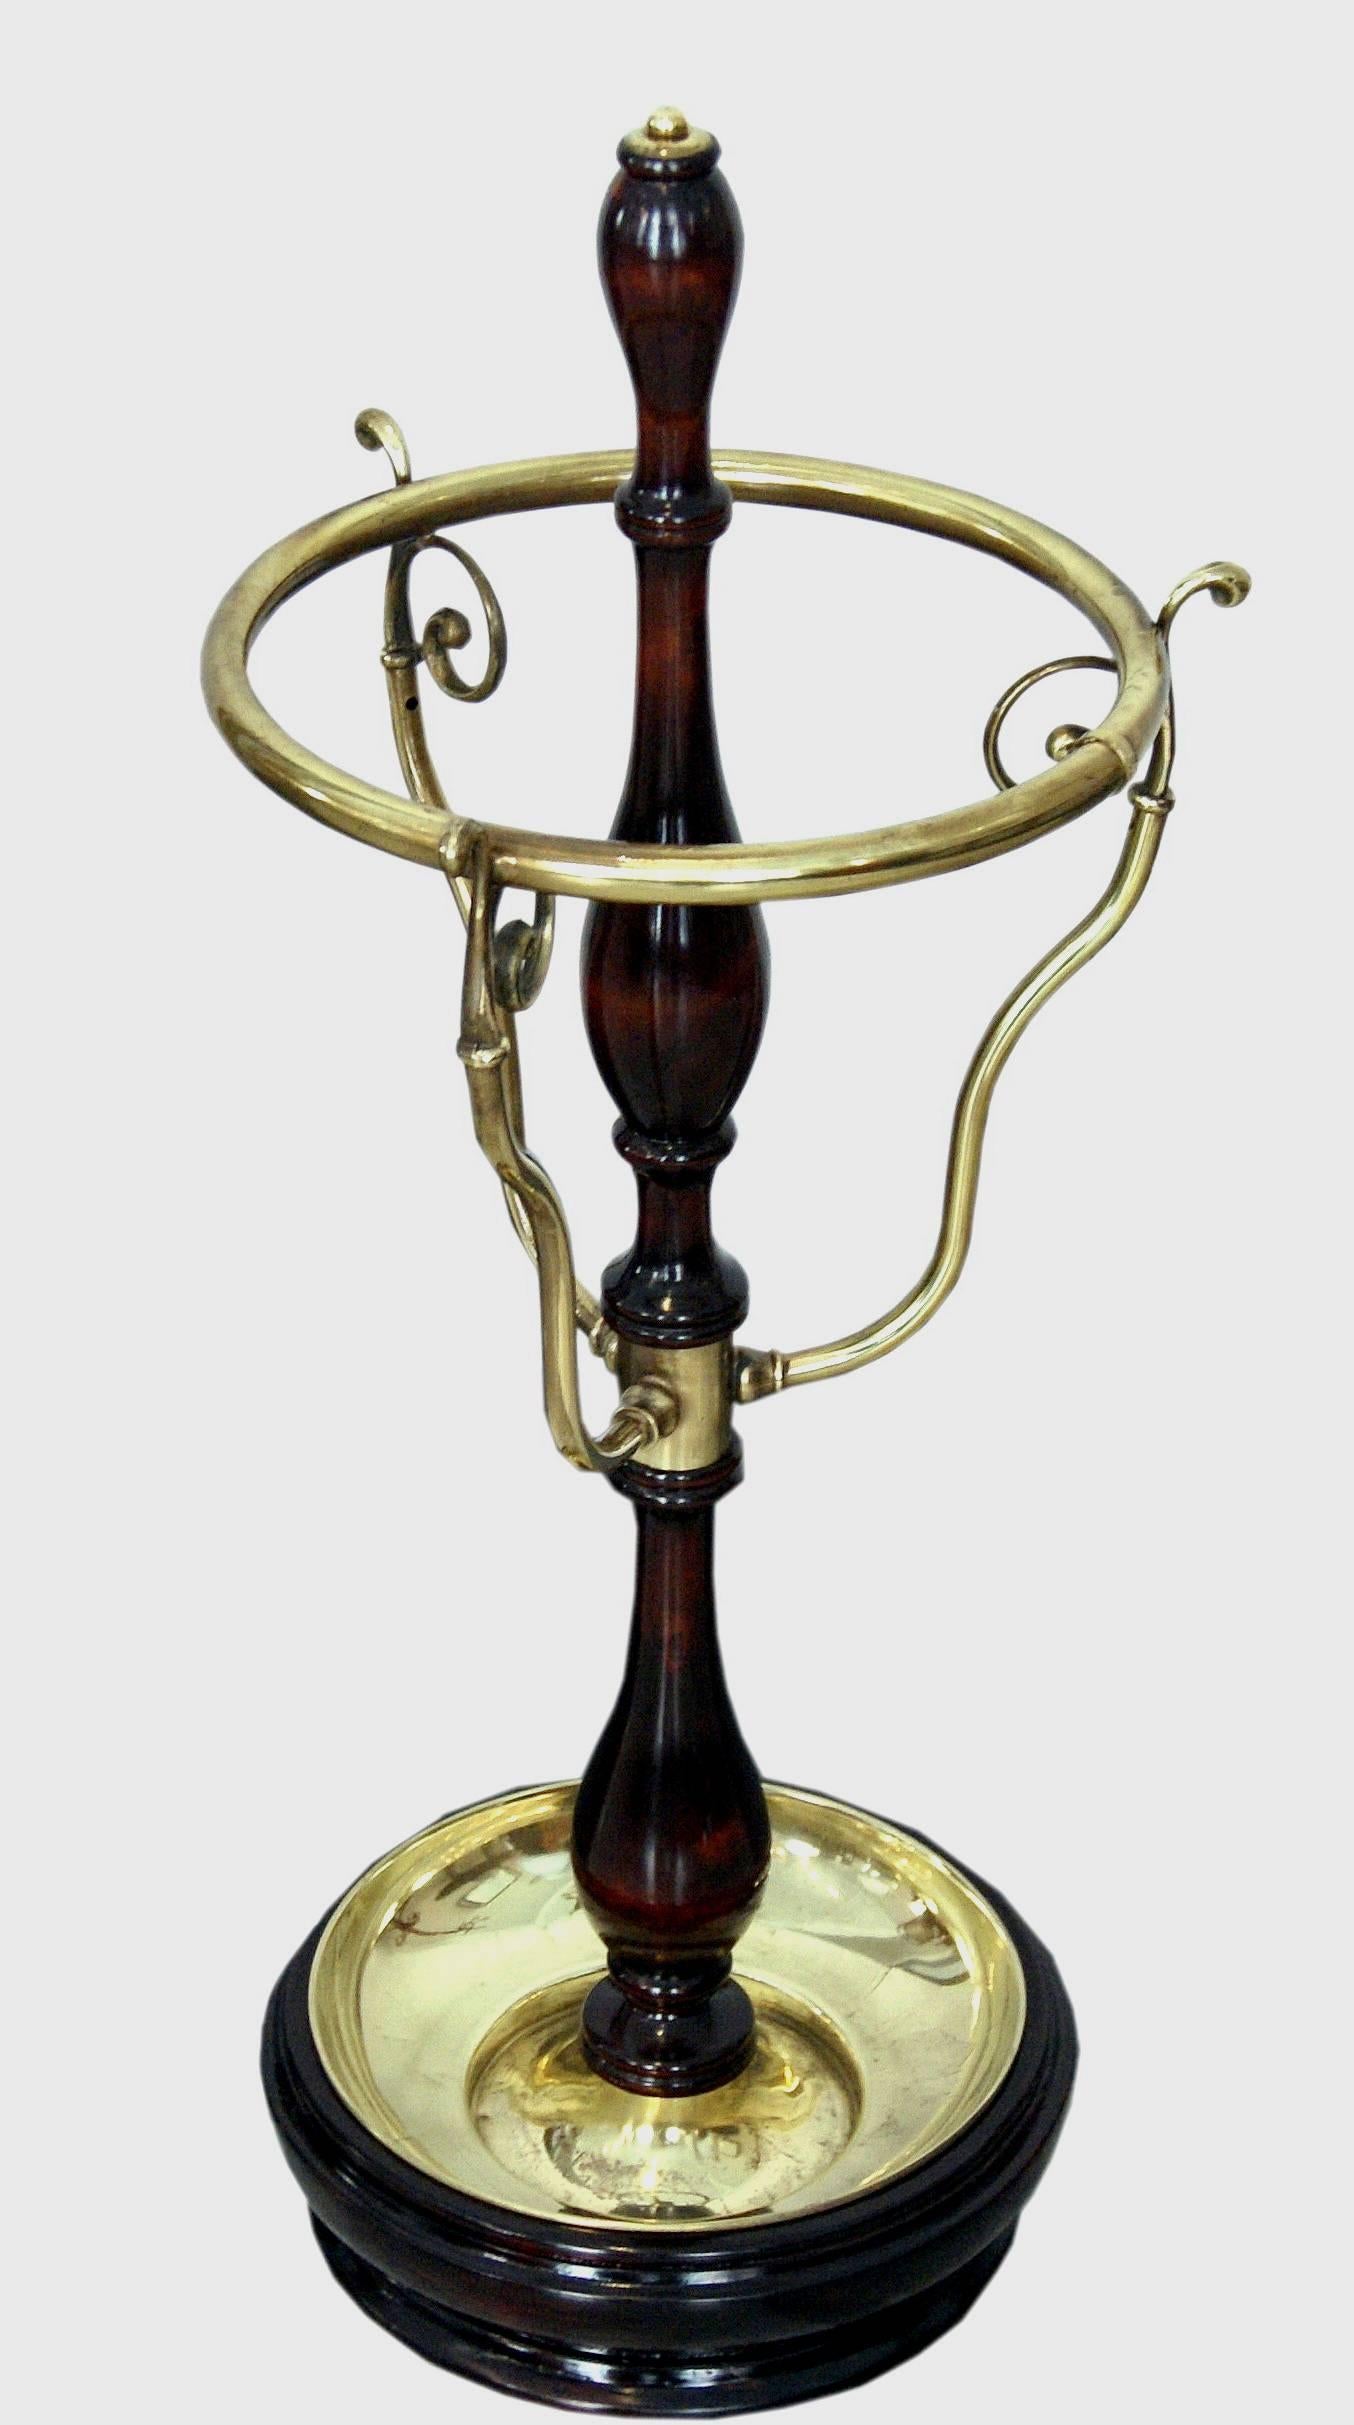 Early 20th Century Vienna Art Nouveau Umbrella Stand Wood Mahogany Stained Brass Fittings